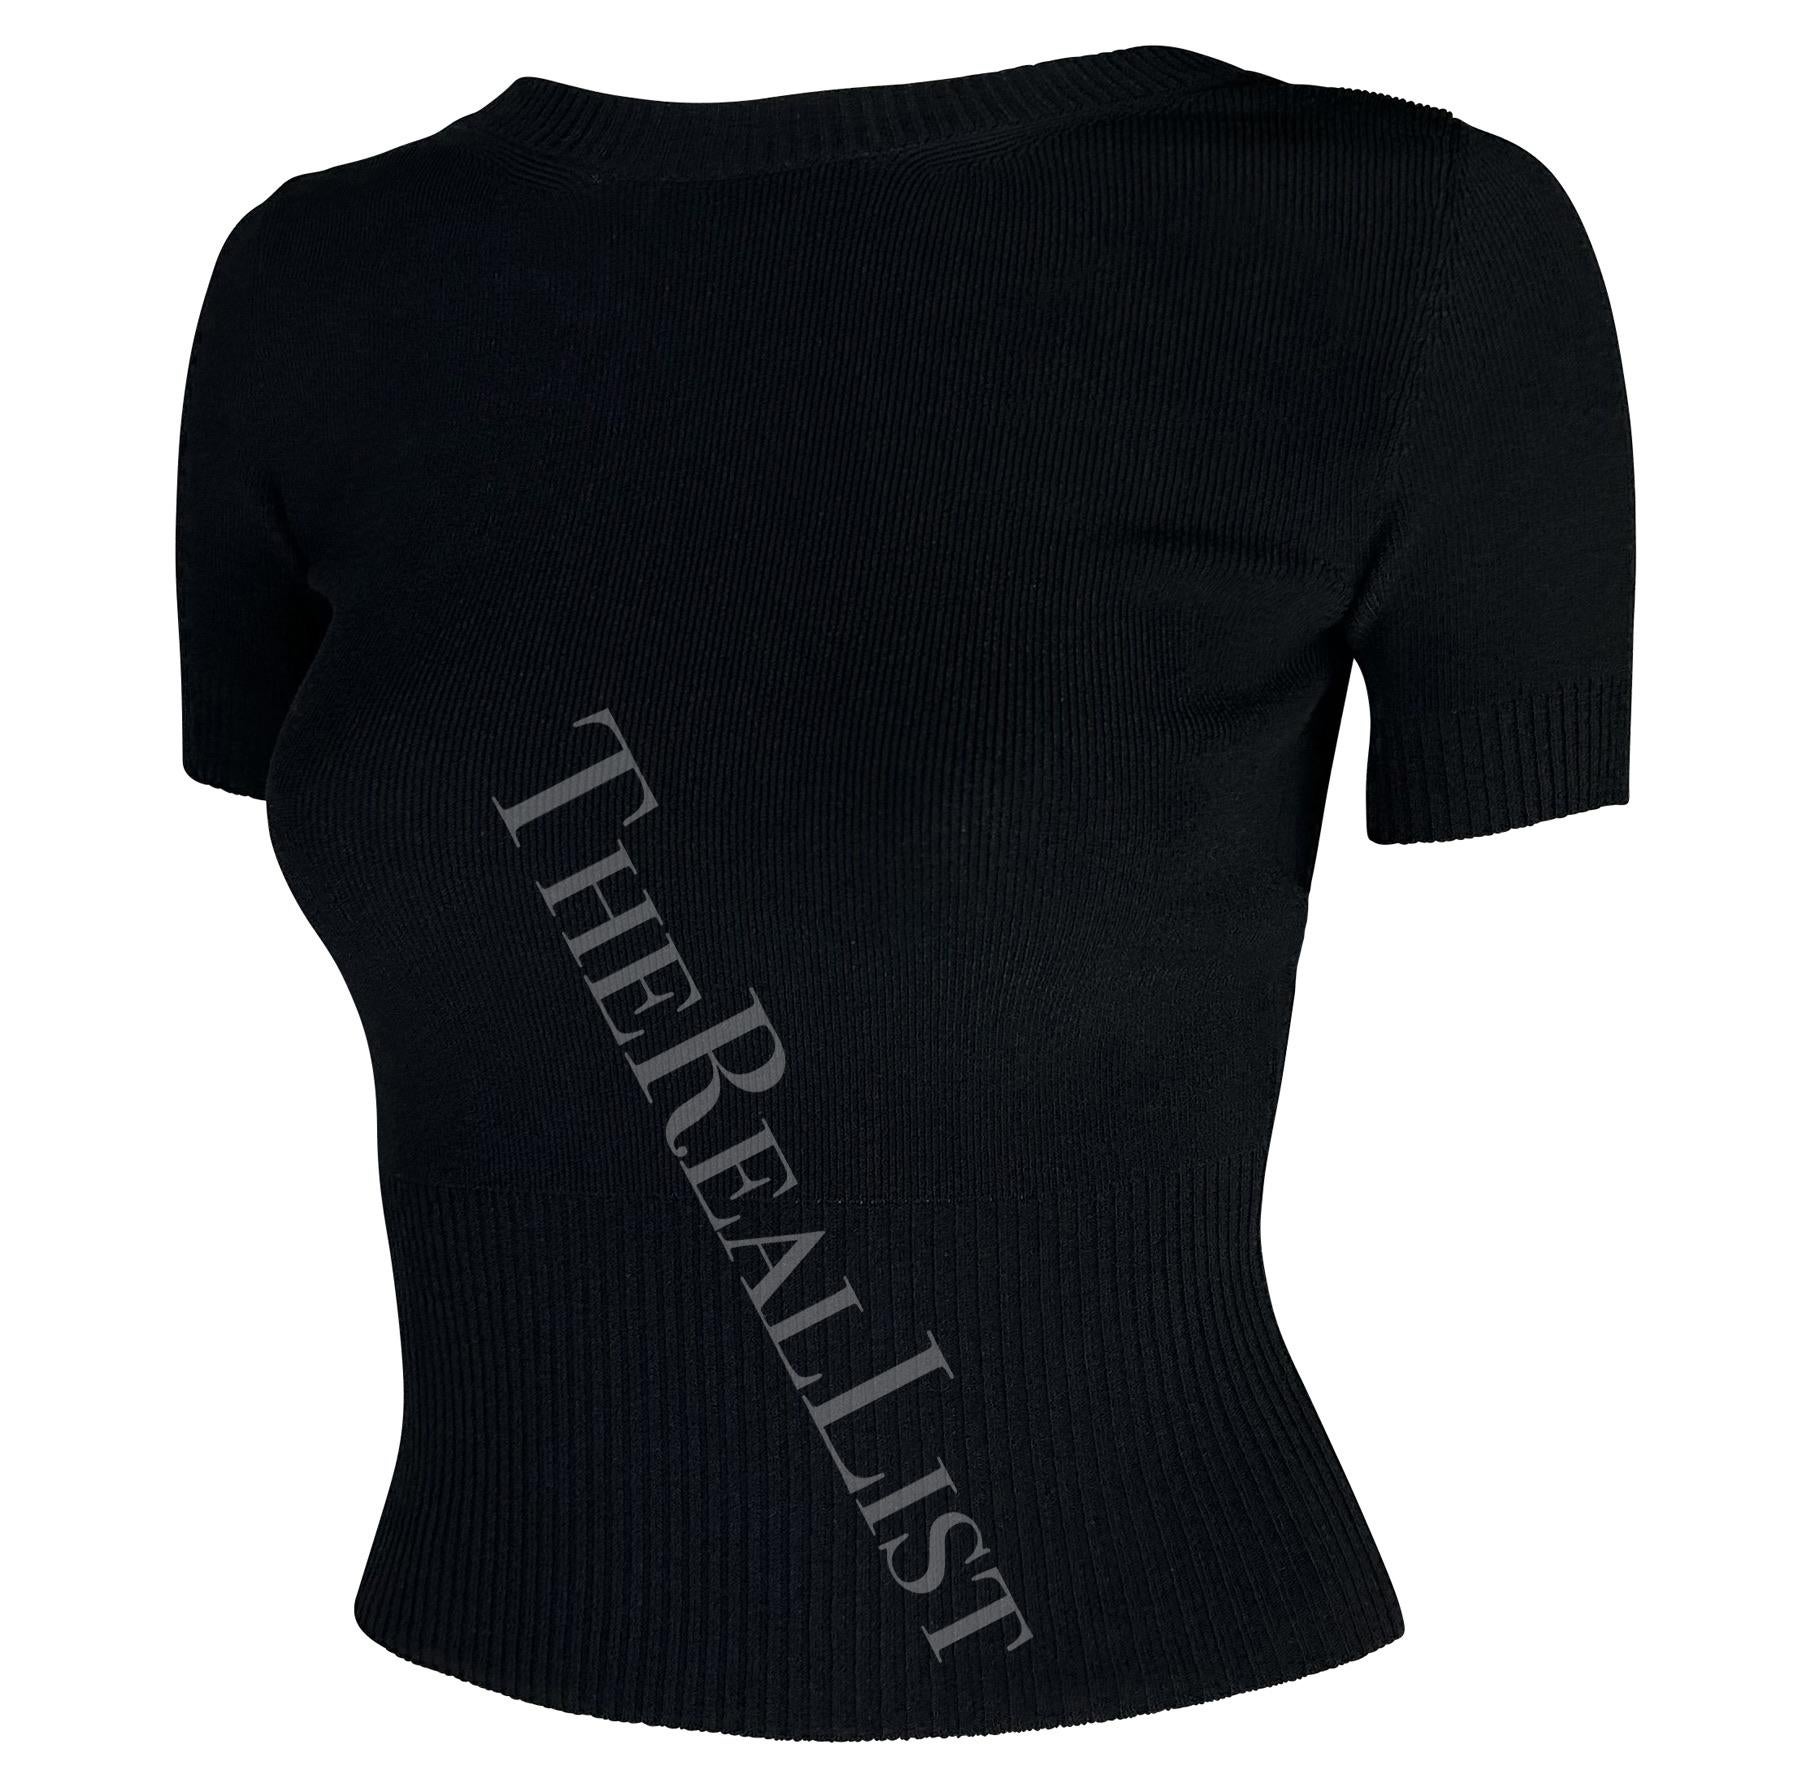 Late 1990s Dolce & Gabbana Runway Black Knit Backless Sweater Crop Top For Sale 1